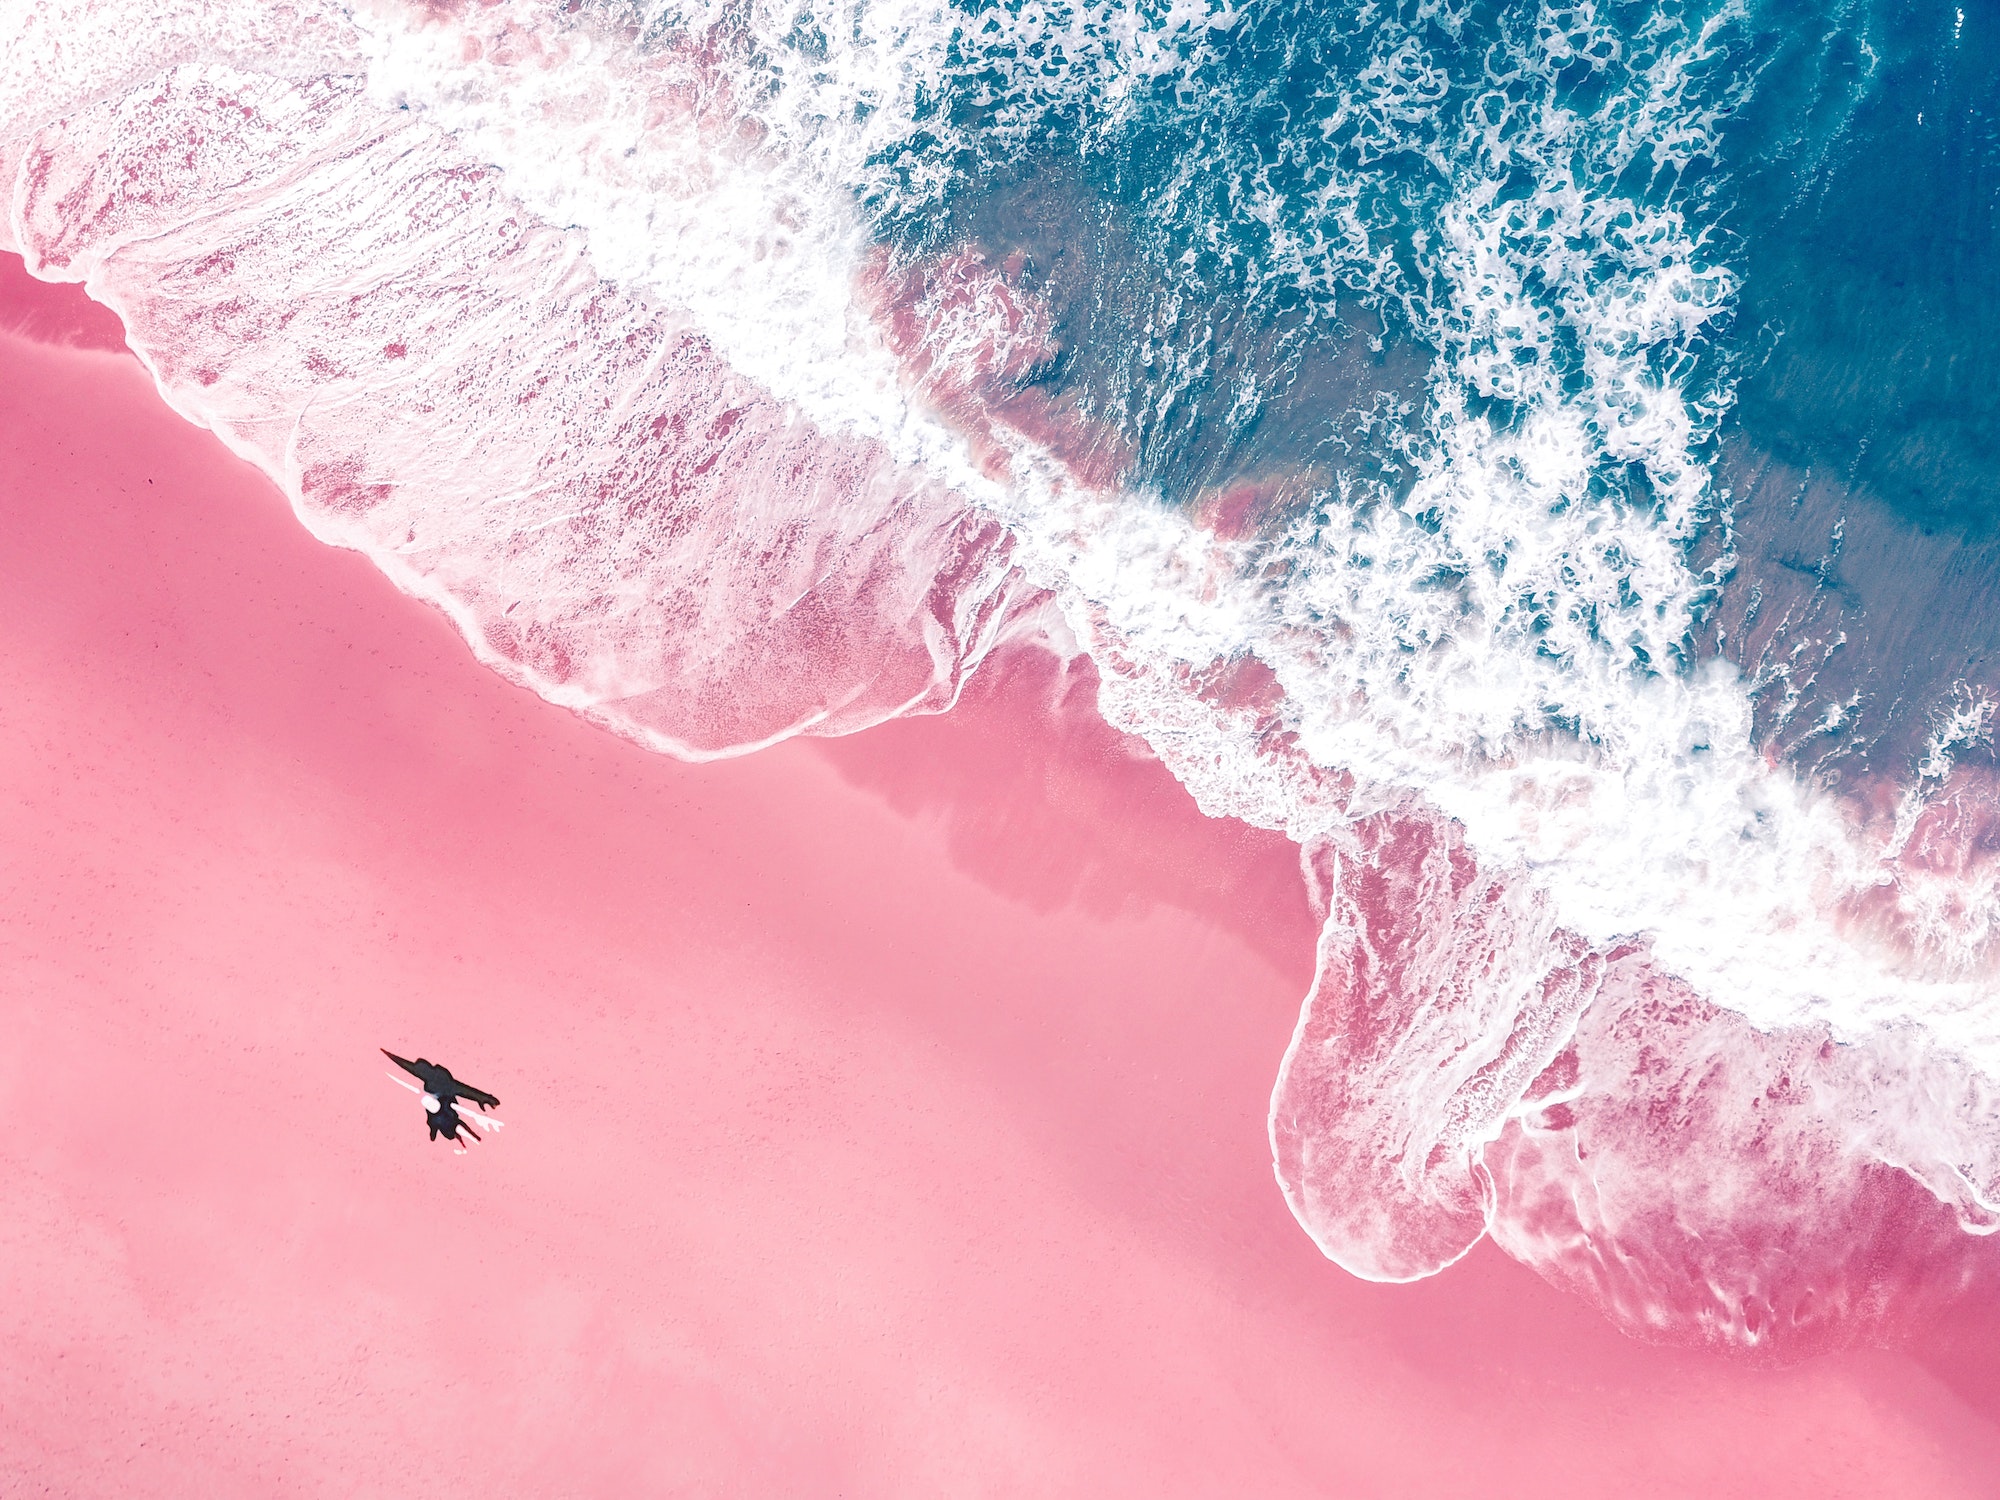 An aerial view of a surfer walking with a surfboard on a pink sandy beach in Australia